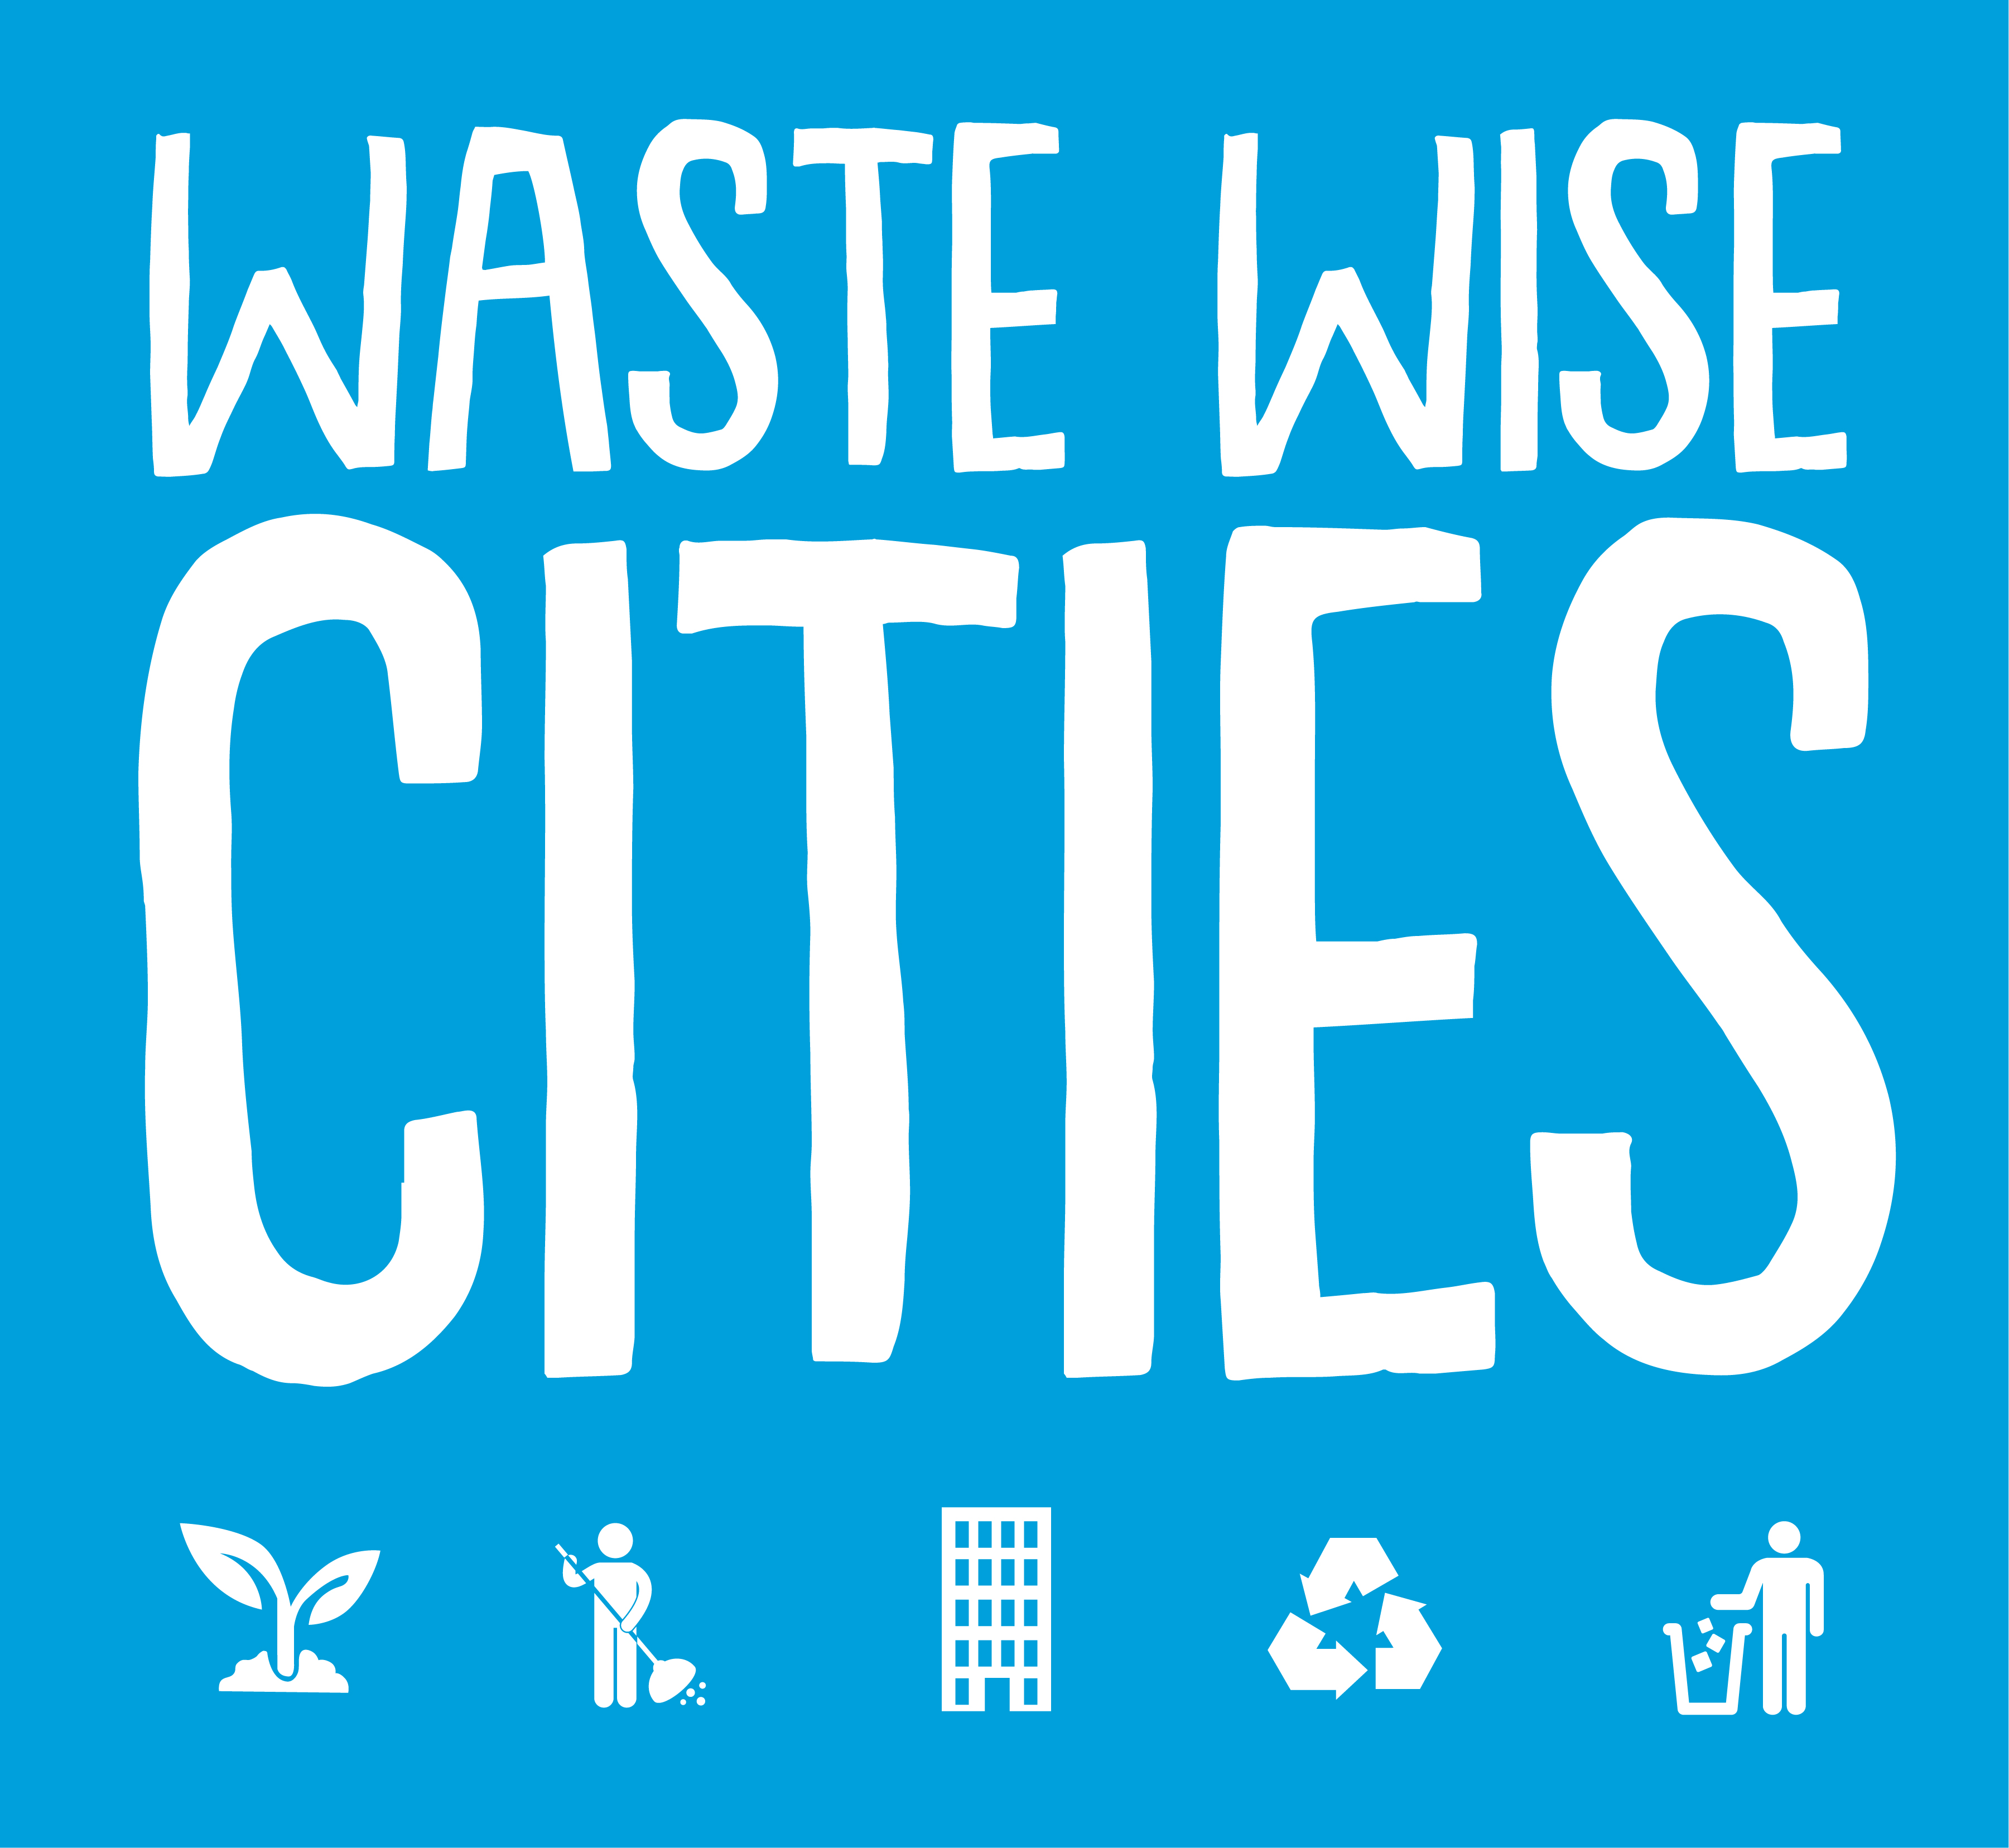 Waste wise cities logo